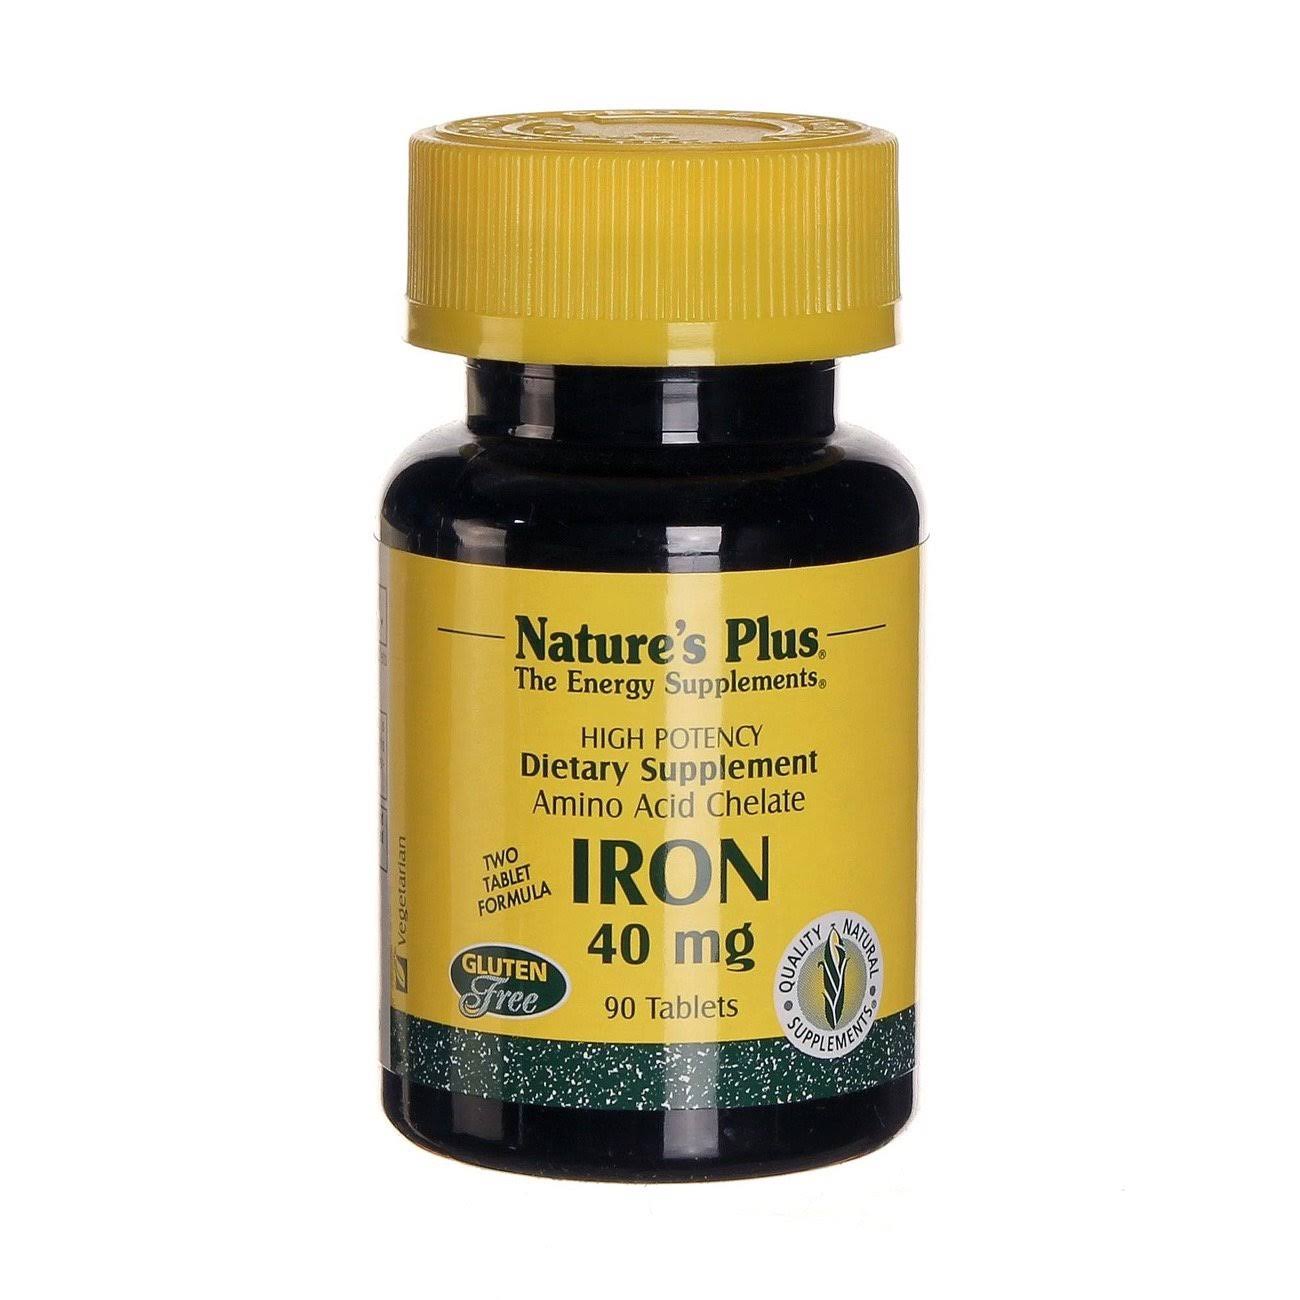 Natures Plus Iron Supplement - 40 mg, 90 Tablets